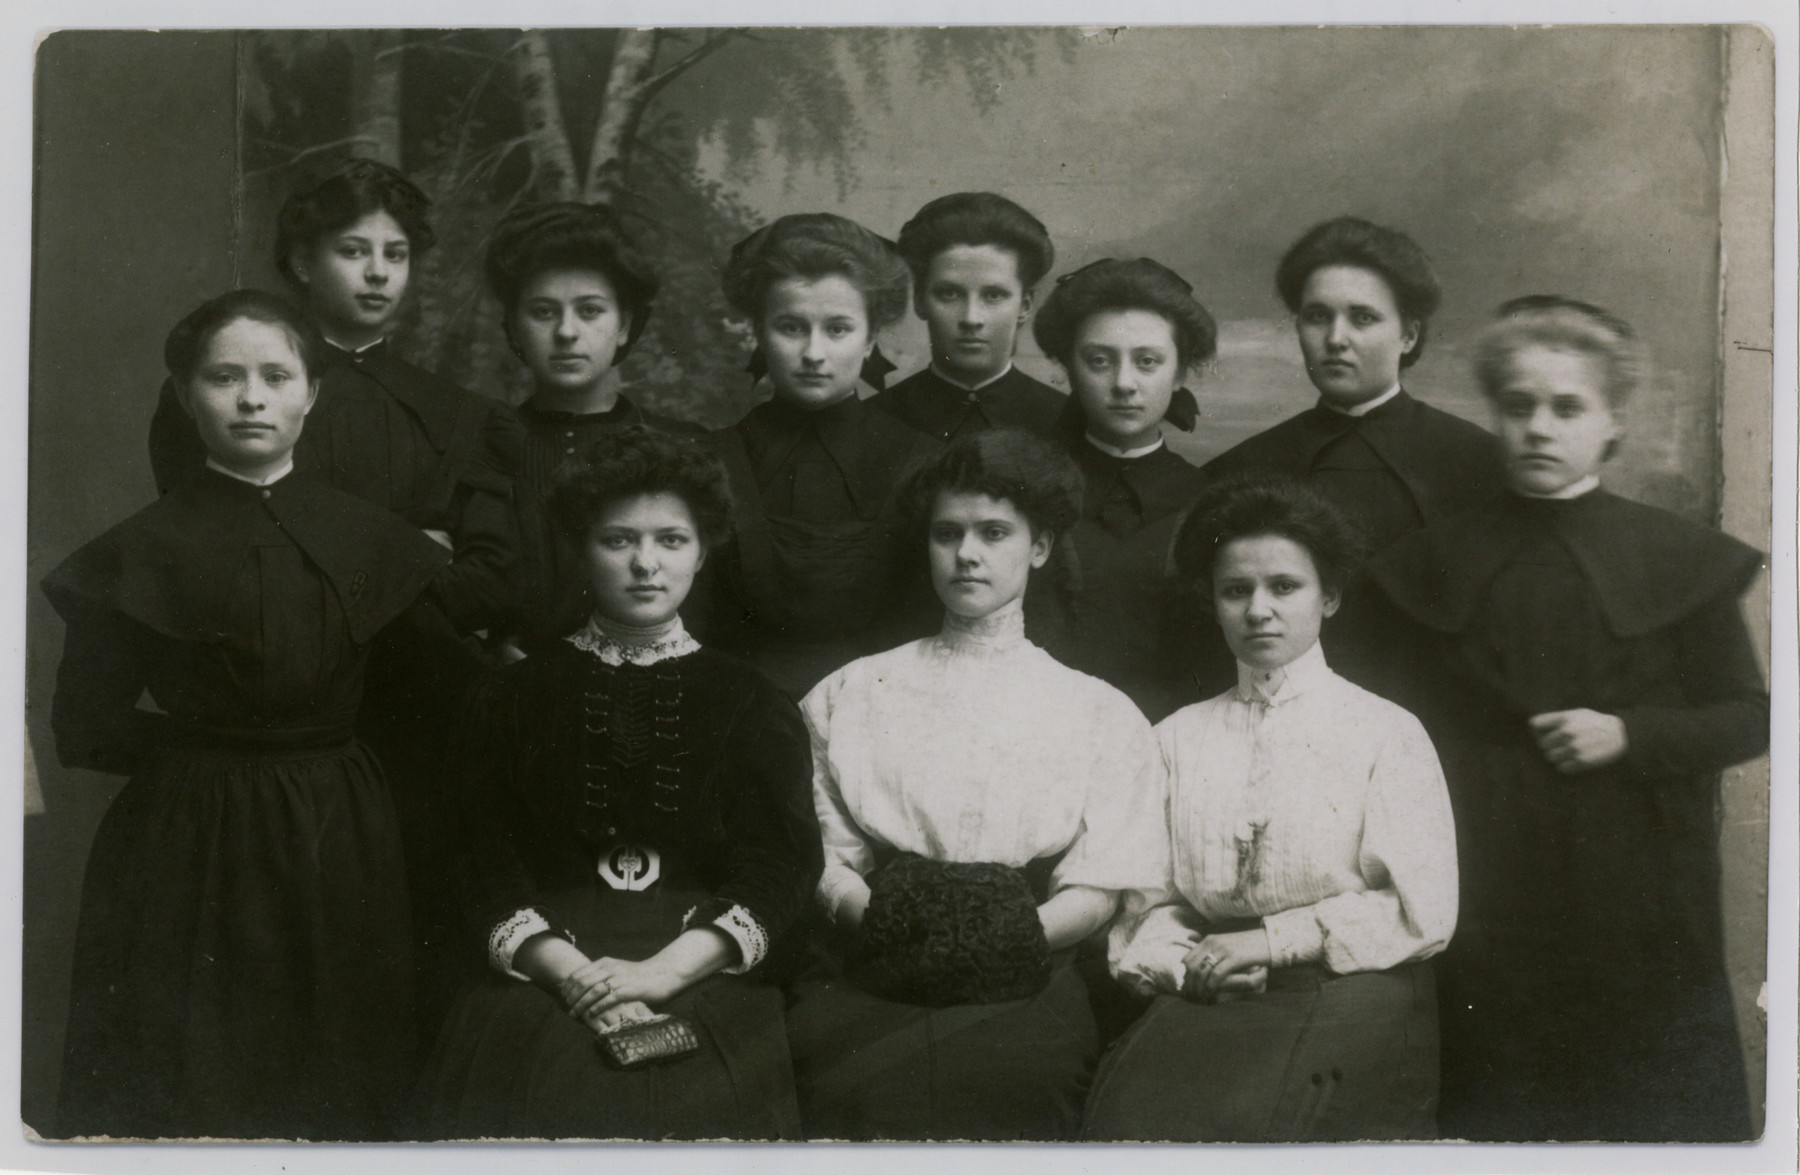 Group portrait of young women in the school for the deaf in Warsaw.

Rebecca Jaglom (Wajcblum) is standing third from the left.